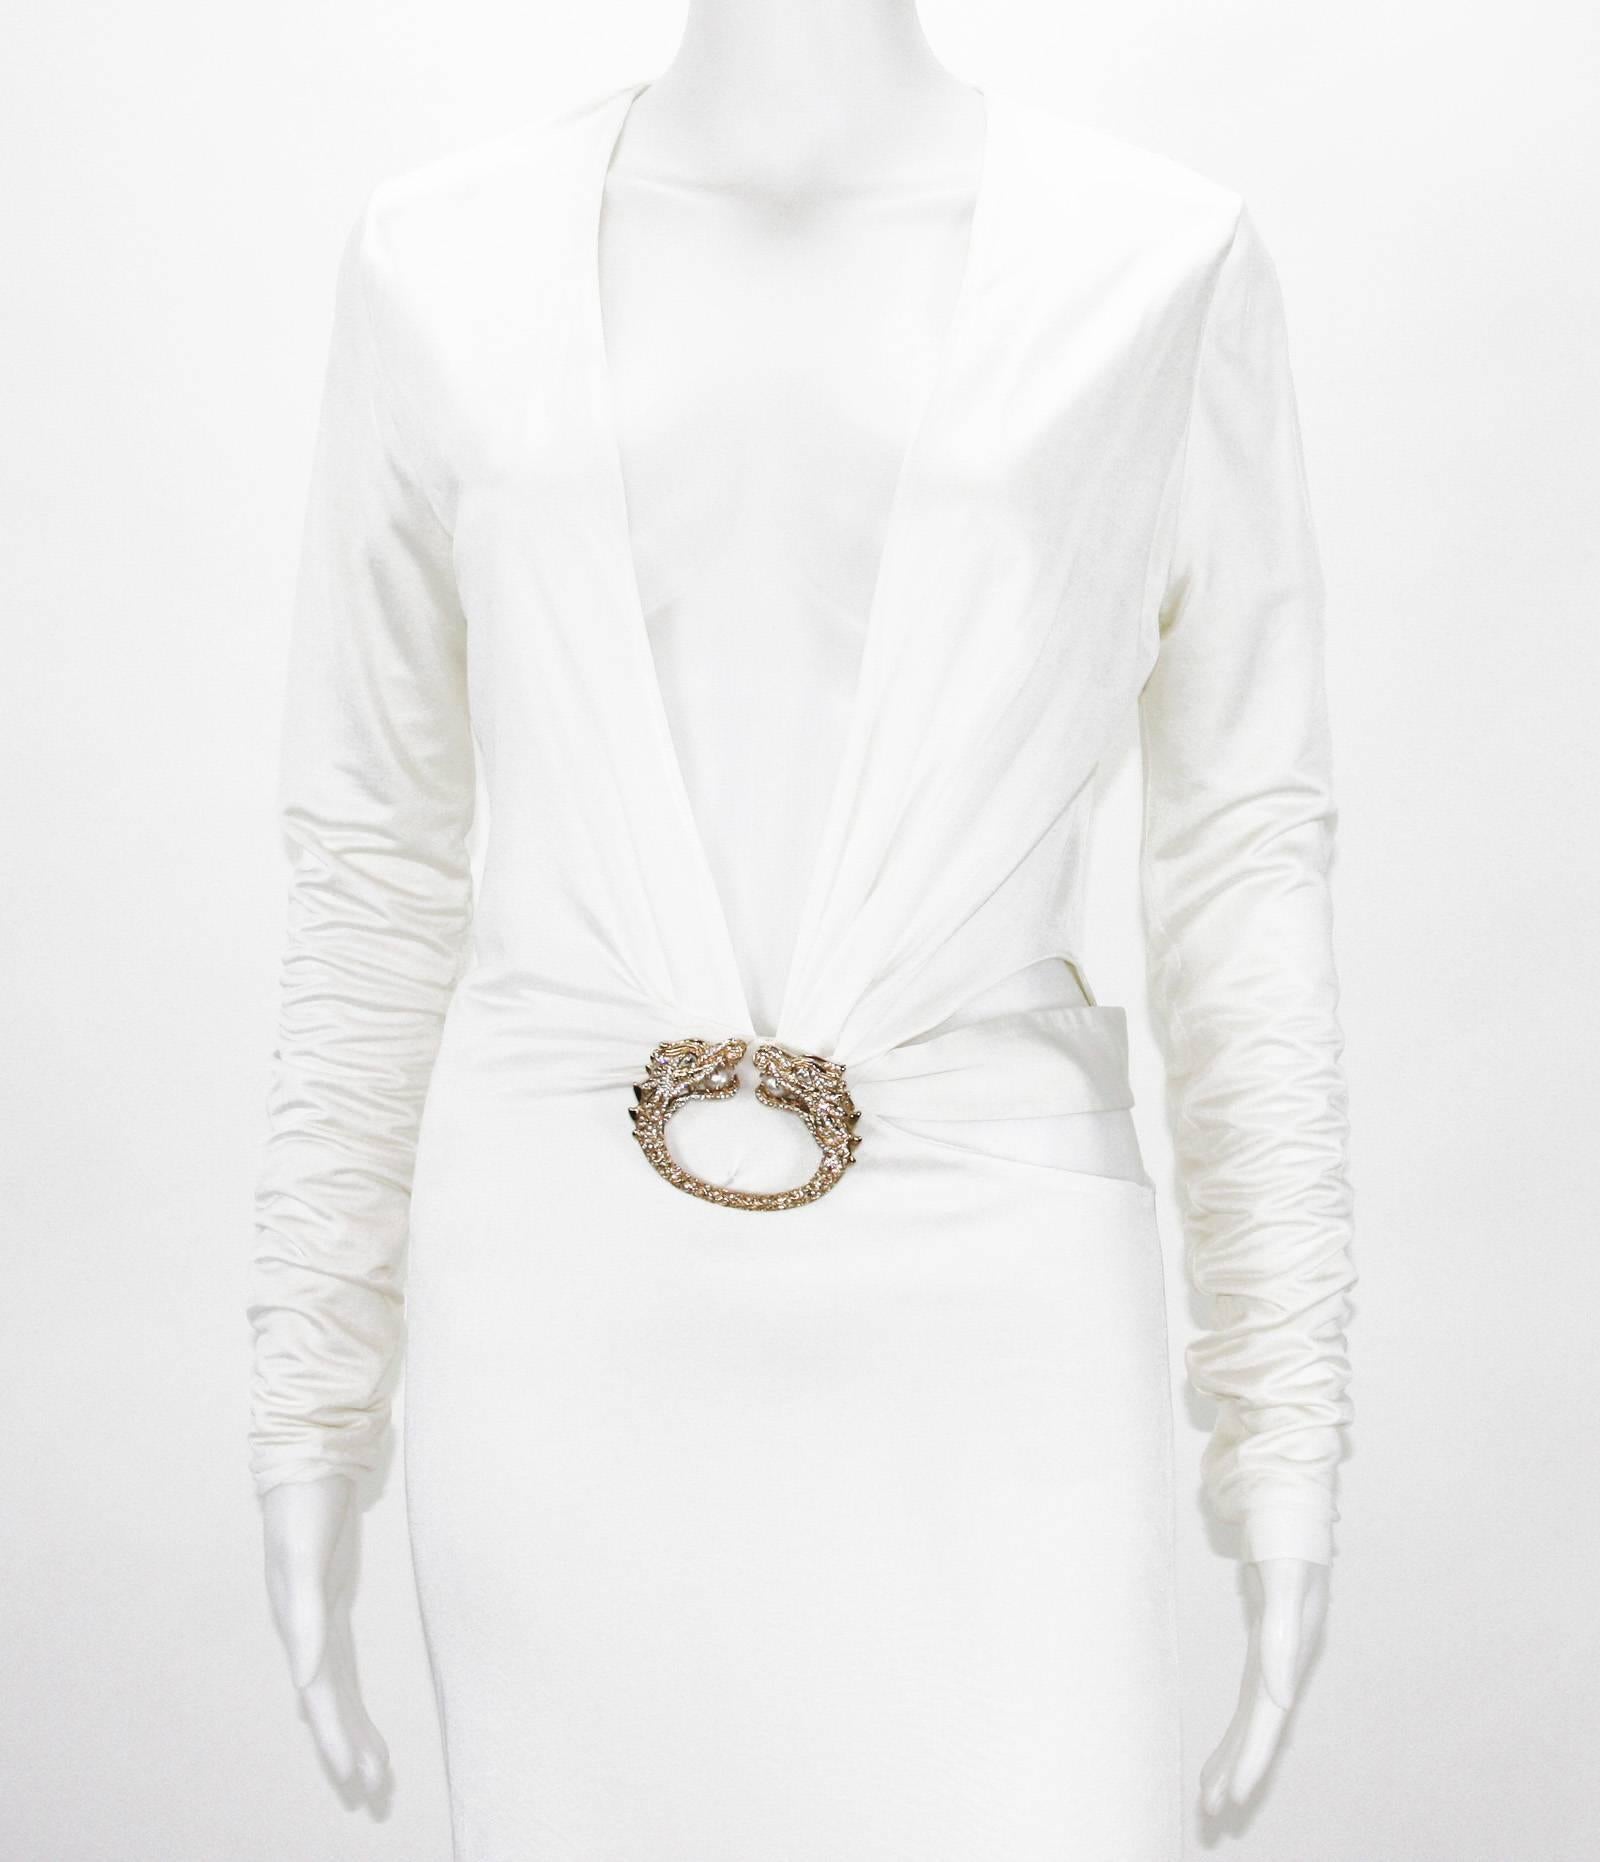 Gray Tom Ford for Gucci White Dress Gown Crystal Dragon Brooch, F /W 2004 